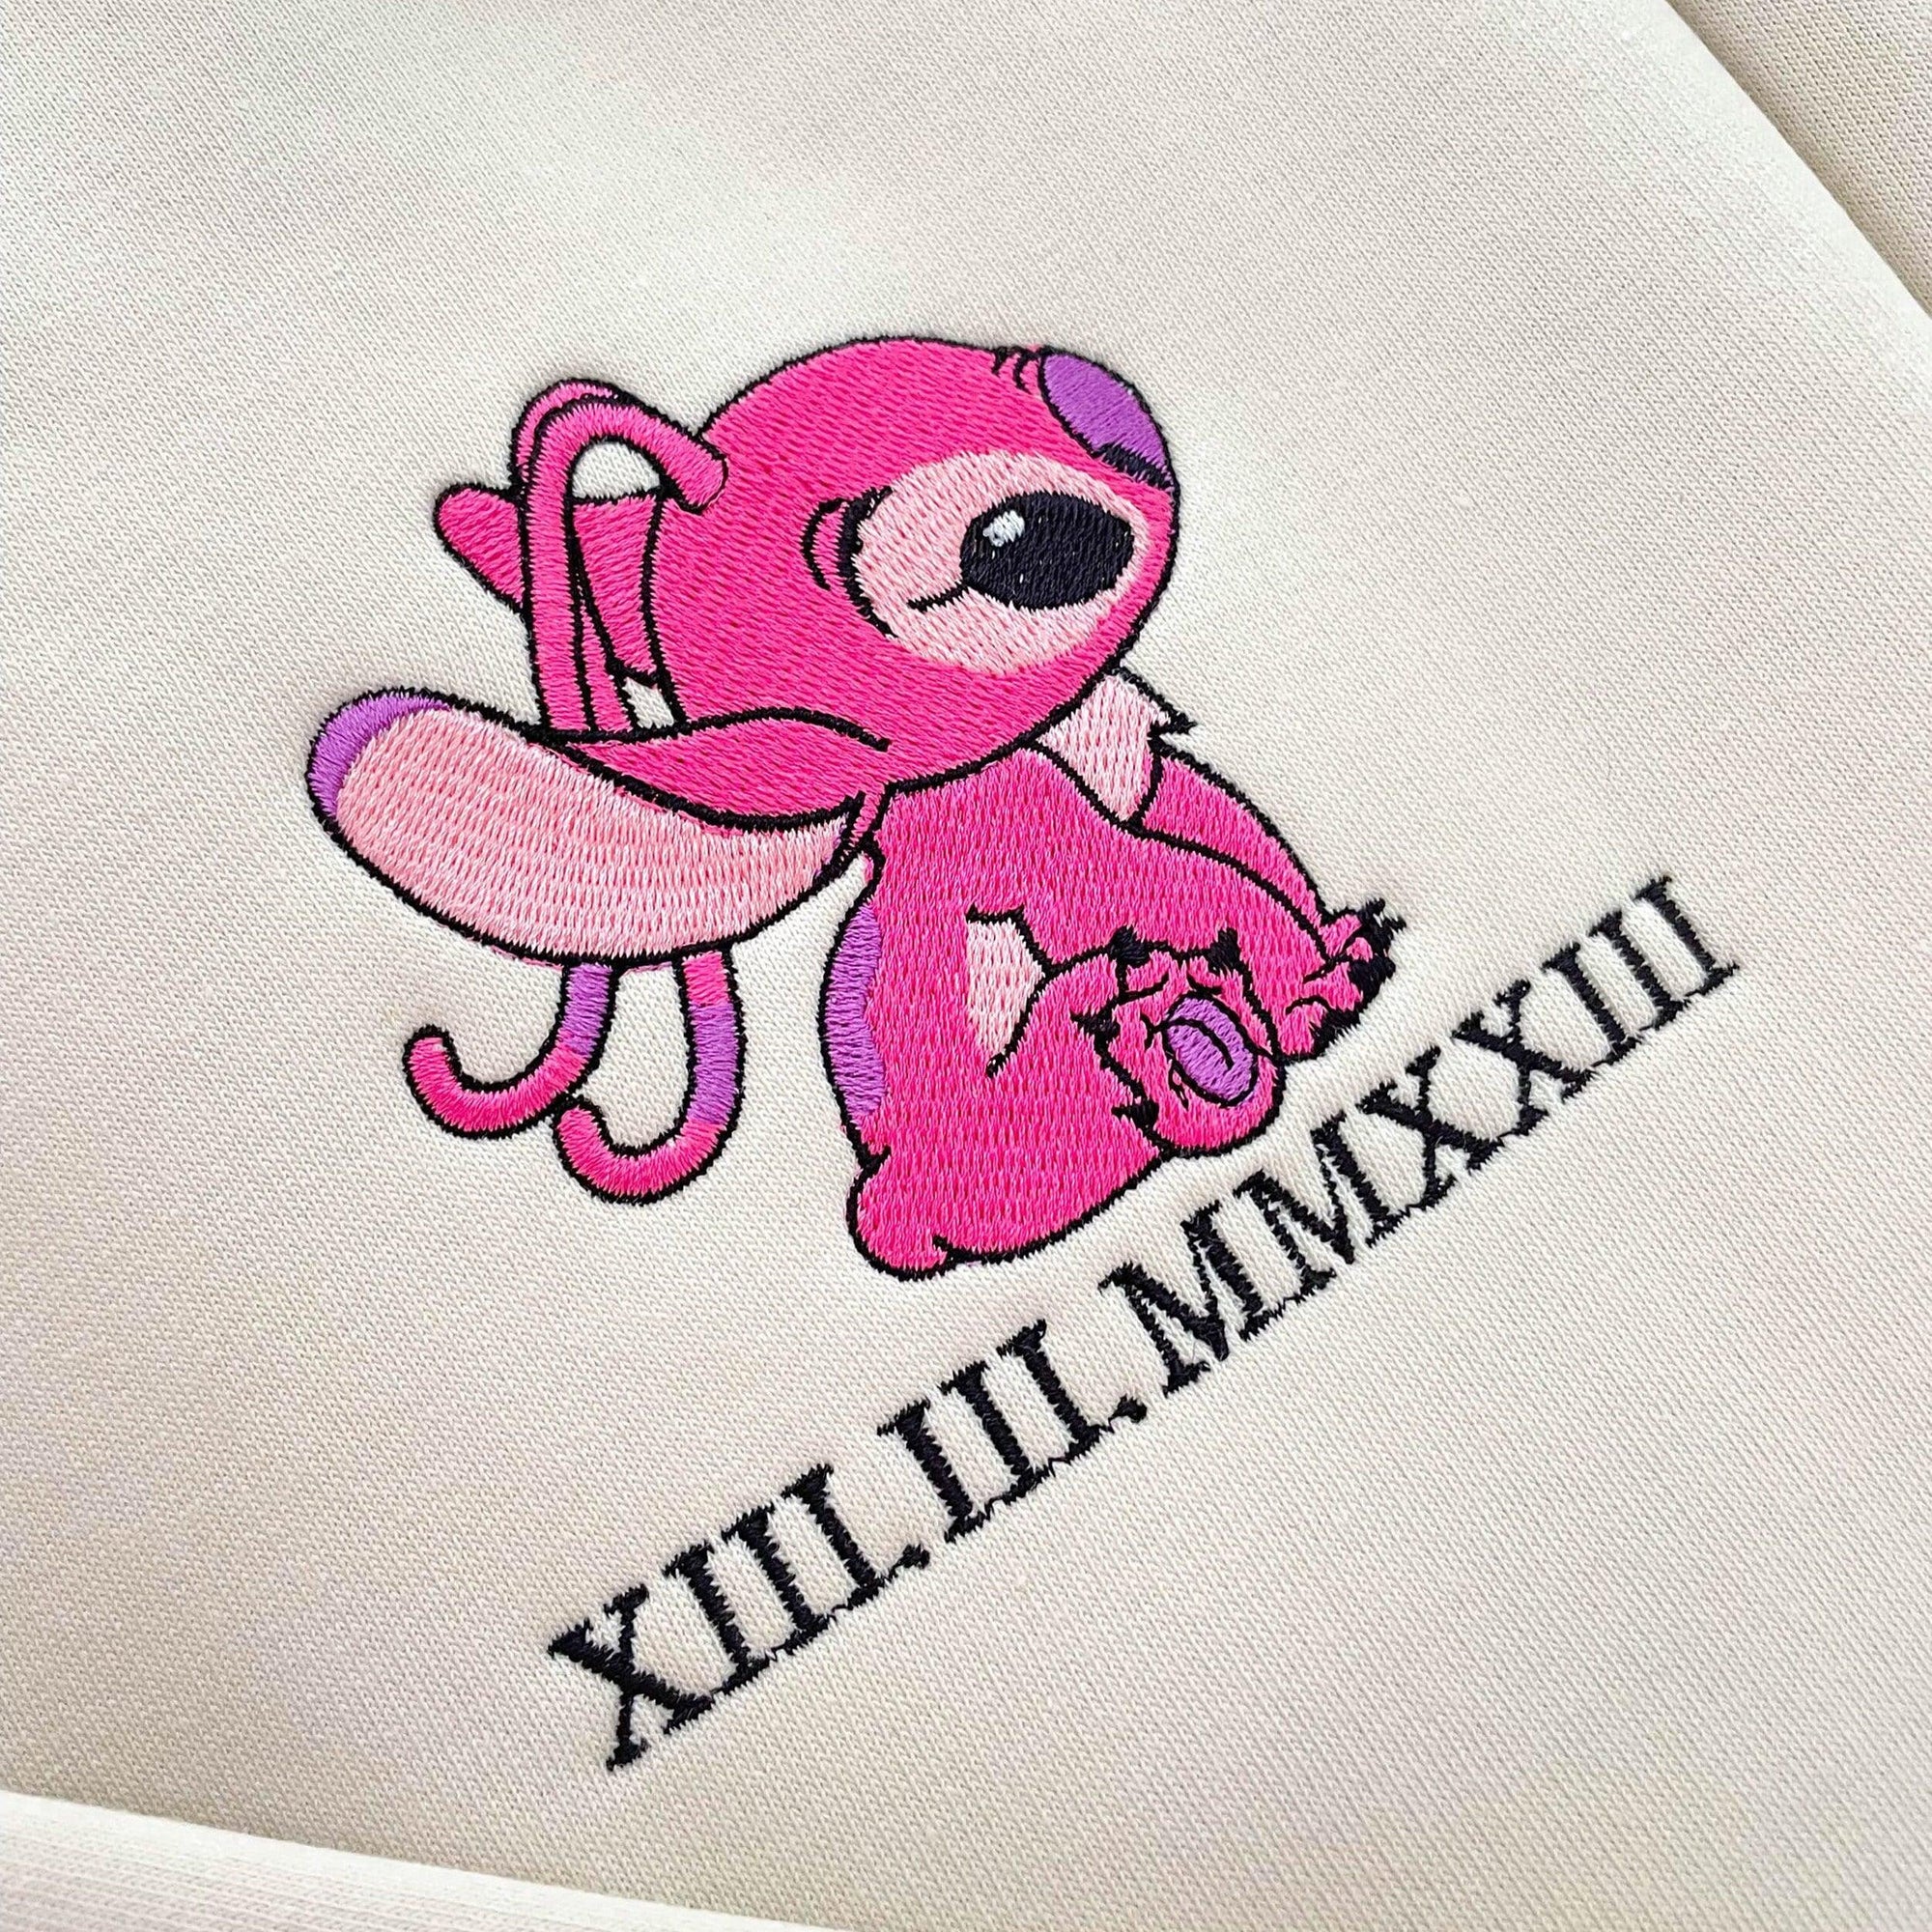 Custom Embroidered Sweatshirts For Couples, Custom Matching Couple Hoodies, Stitch Couples Roman Numeral Date Crewneck Embroidered Sweatshirt